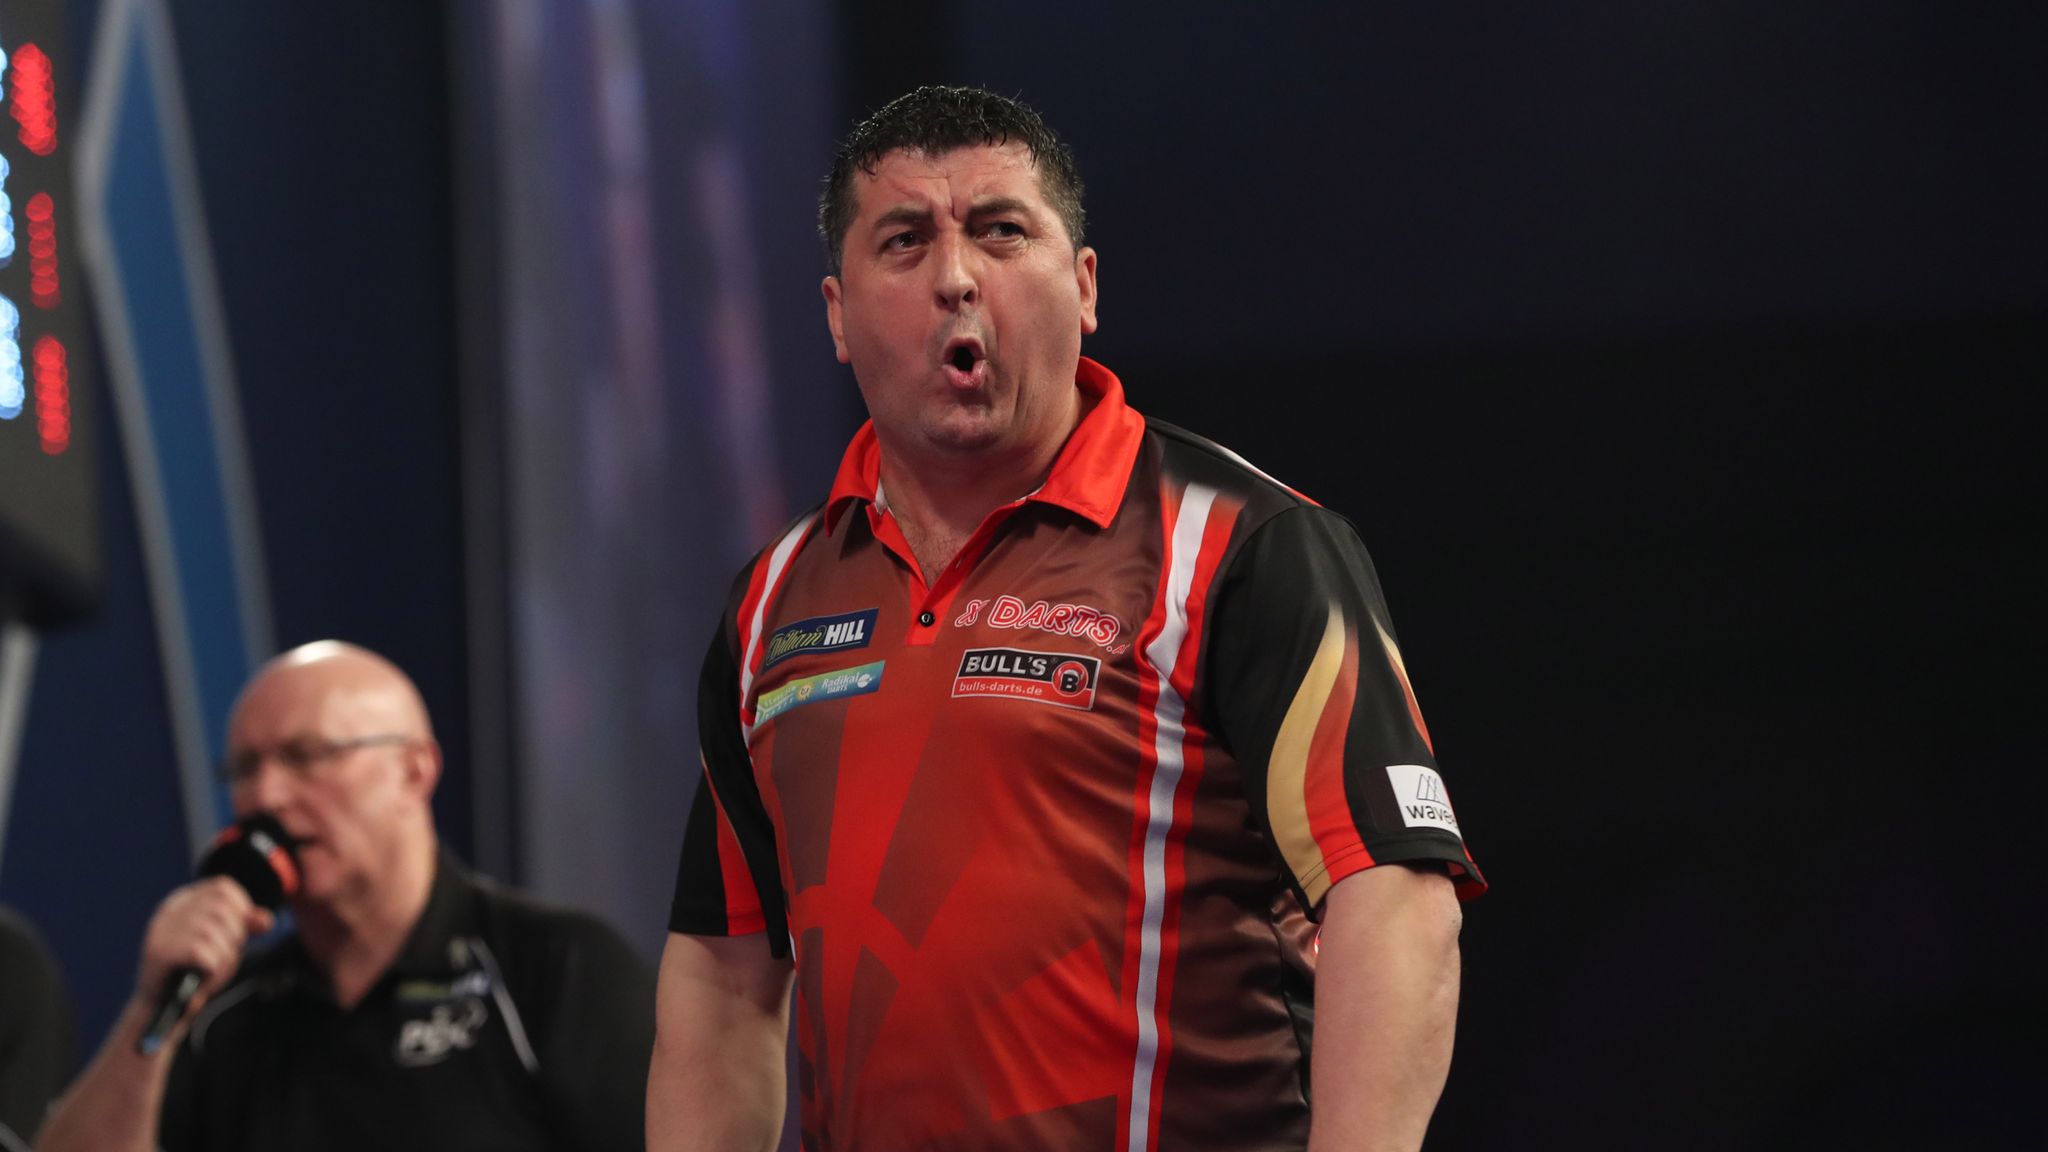 Mensur Suljovic describes his journey from war-torn Serbia to successful darts career Darts News Sky Sports